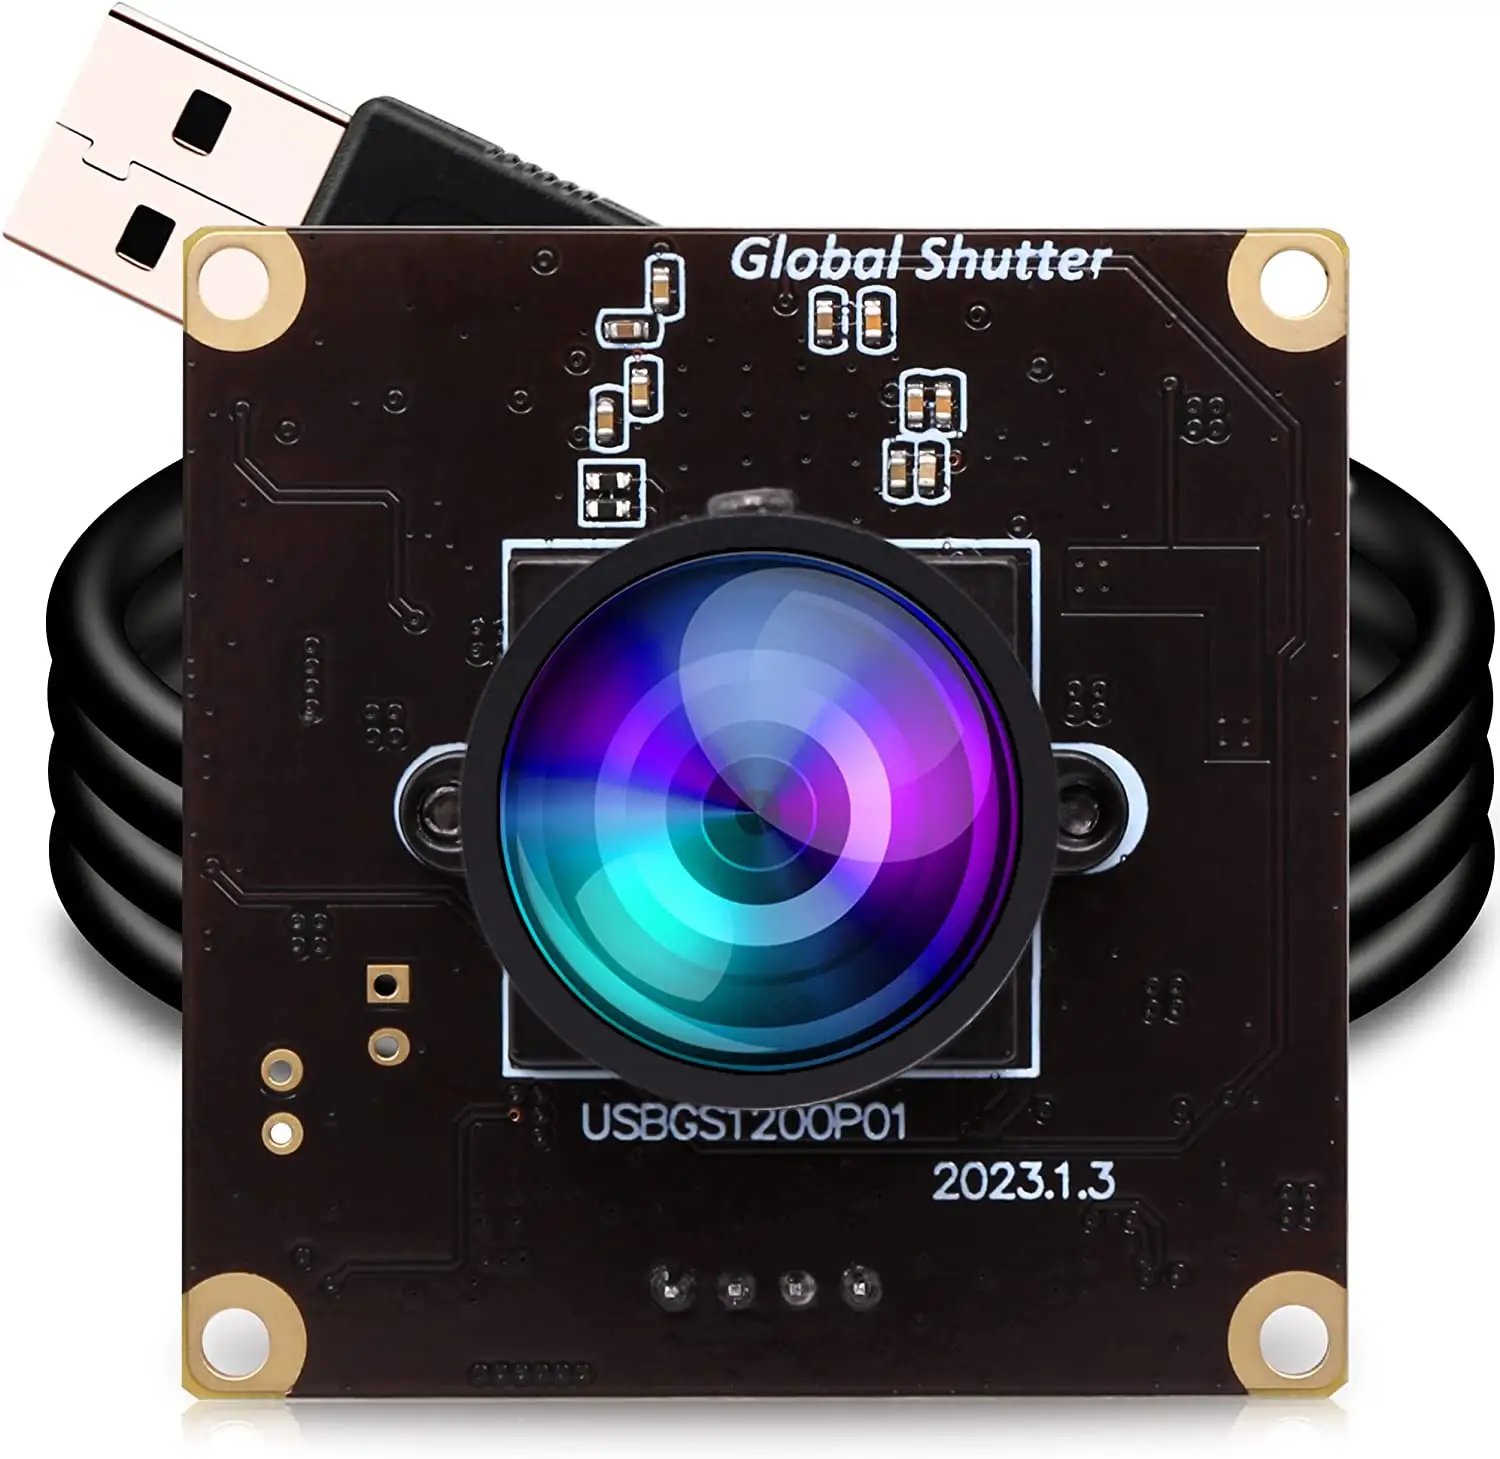 ELP High Speed Global Shutter USB Camera Module with 2.1mm Wide Angle Lens 2MP AR0234 90fps USB Web PC Camera Board for Computer